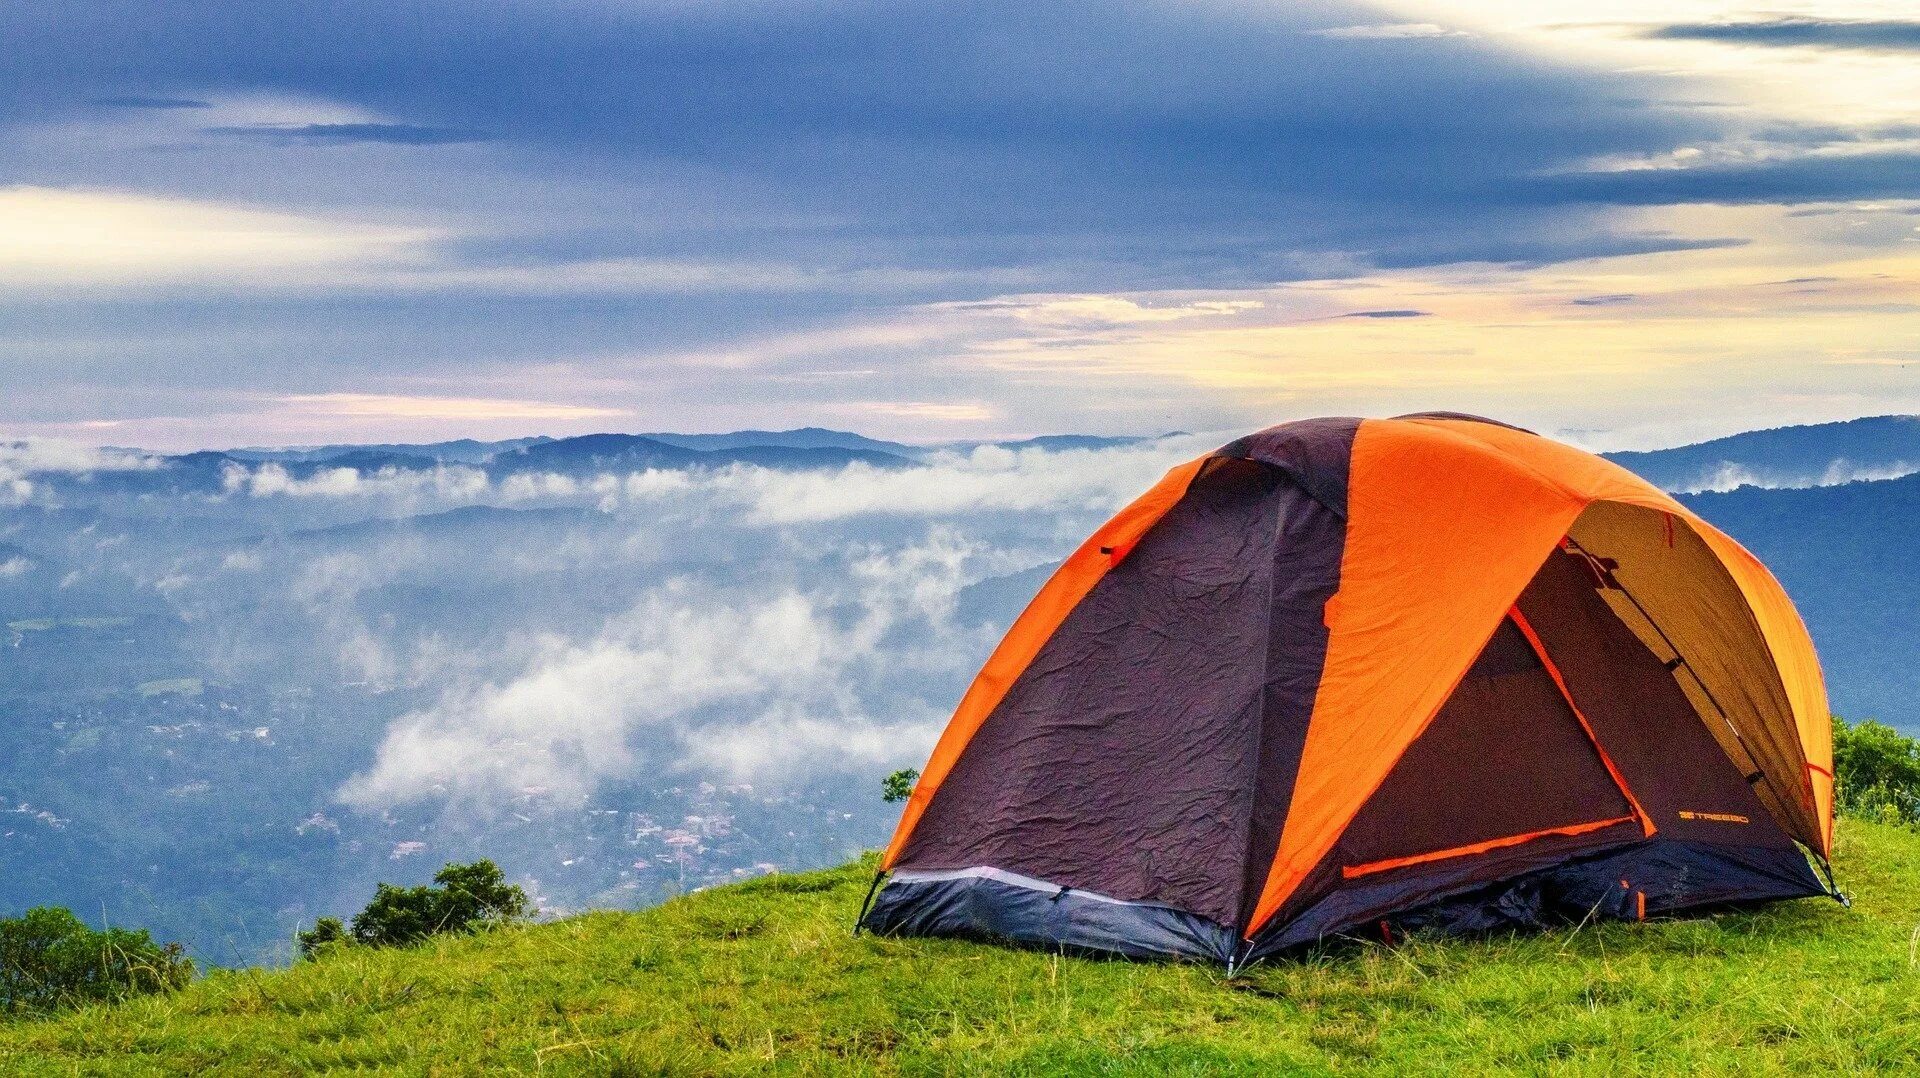 Tourist camping. Палатка Camping Tent. Палатка Totem Summer 2 Plus. Миркампинг 2022 палатка. Палатка туристическая Outdoor Tent.